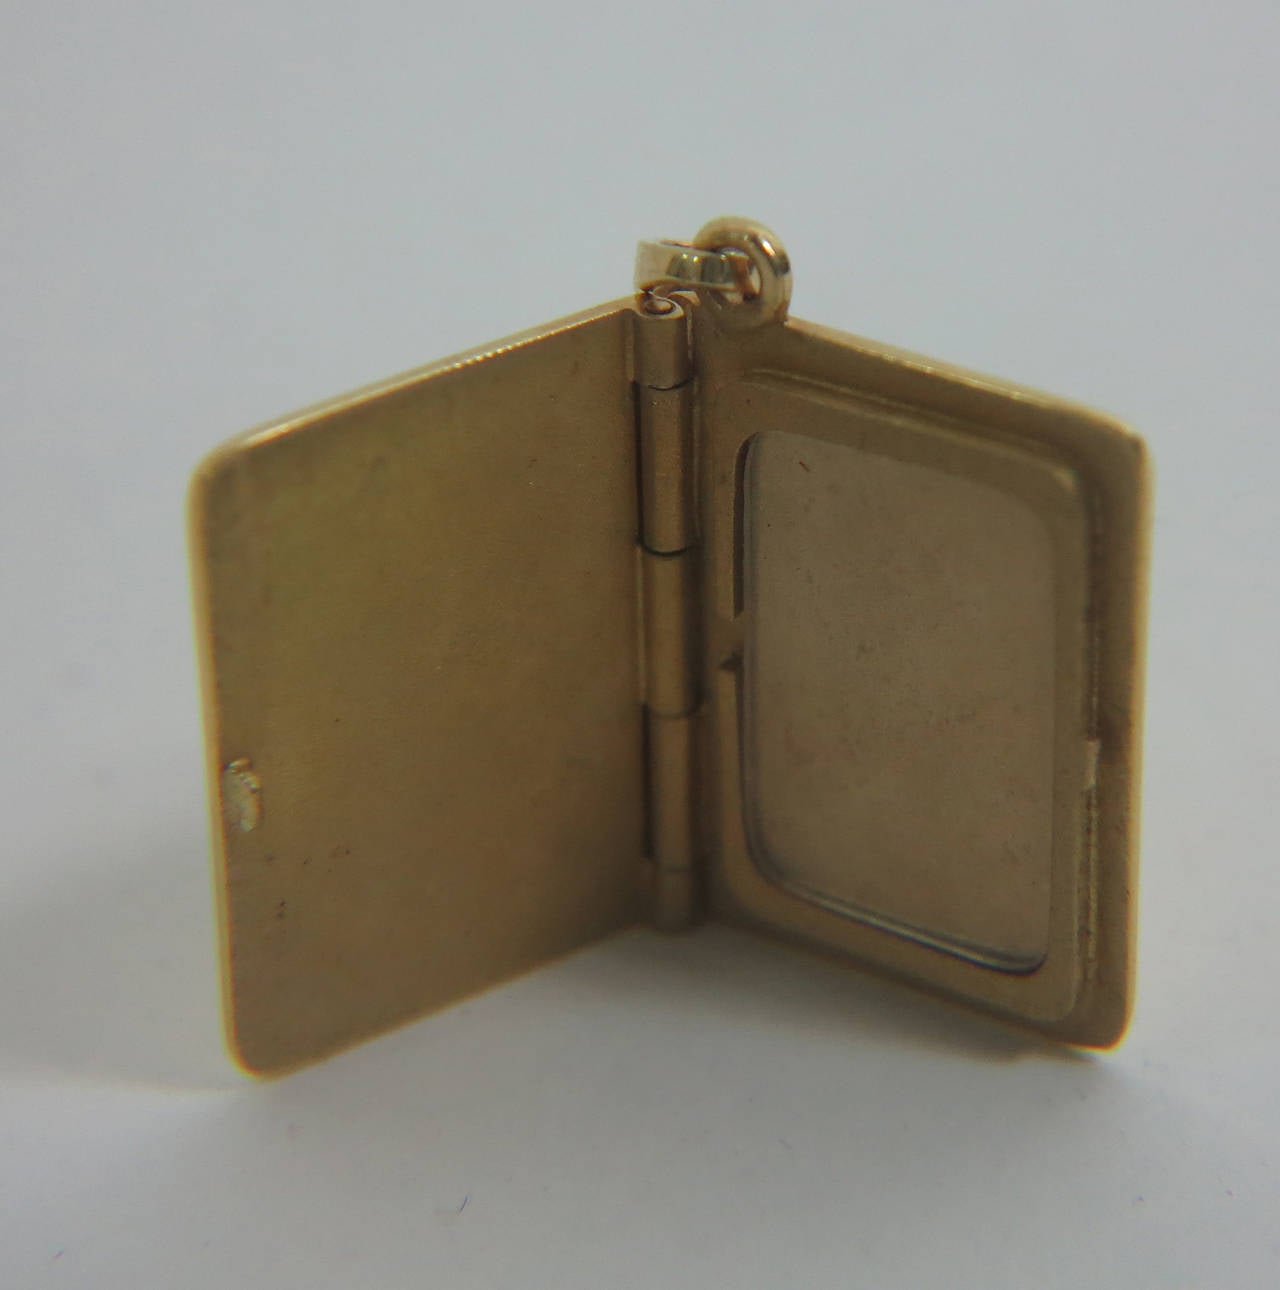 Cartier 18K {750} gold United States passport photo holder charm...Opens to hold a photograph...In very good condition, with some scratches as you would expect from use.

Measurements are:
Width .625
Height .875
Width open 1